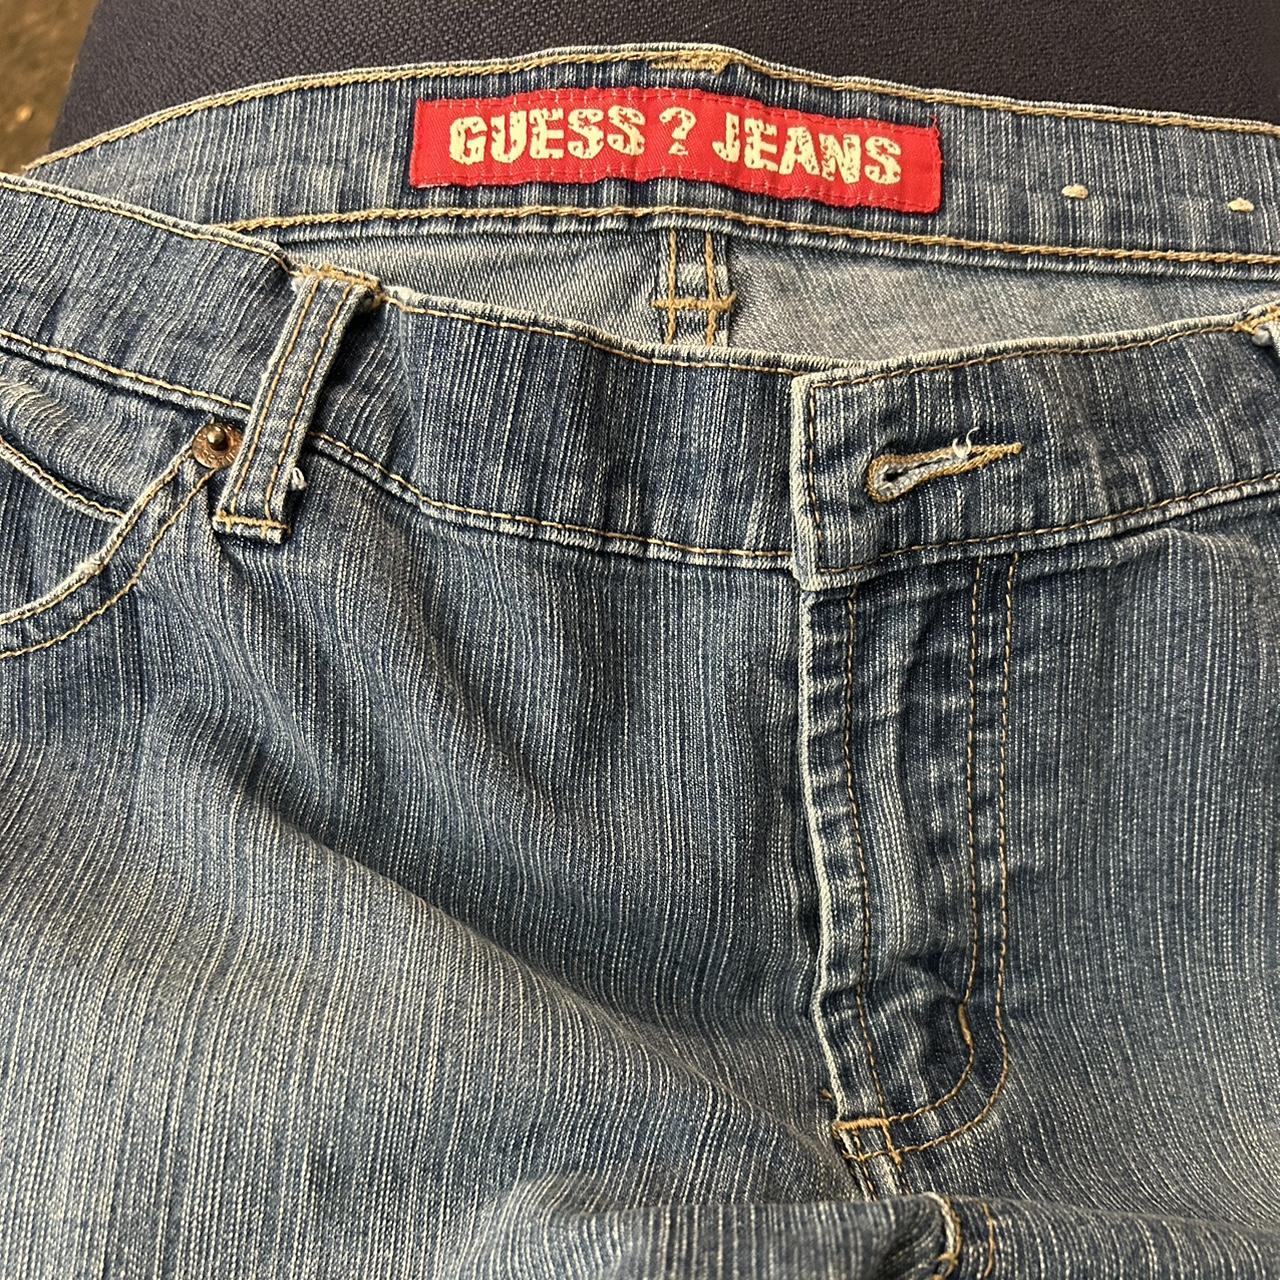 32x32 Flare bottom Guess Jeans great condition - Depop